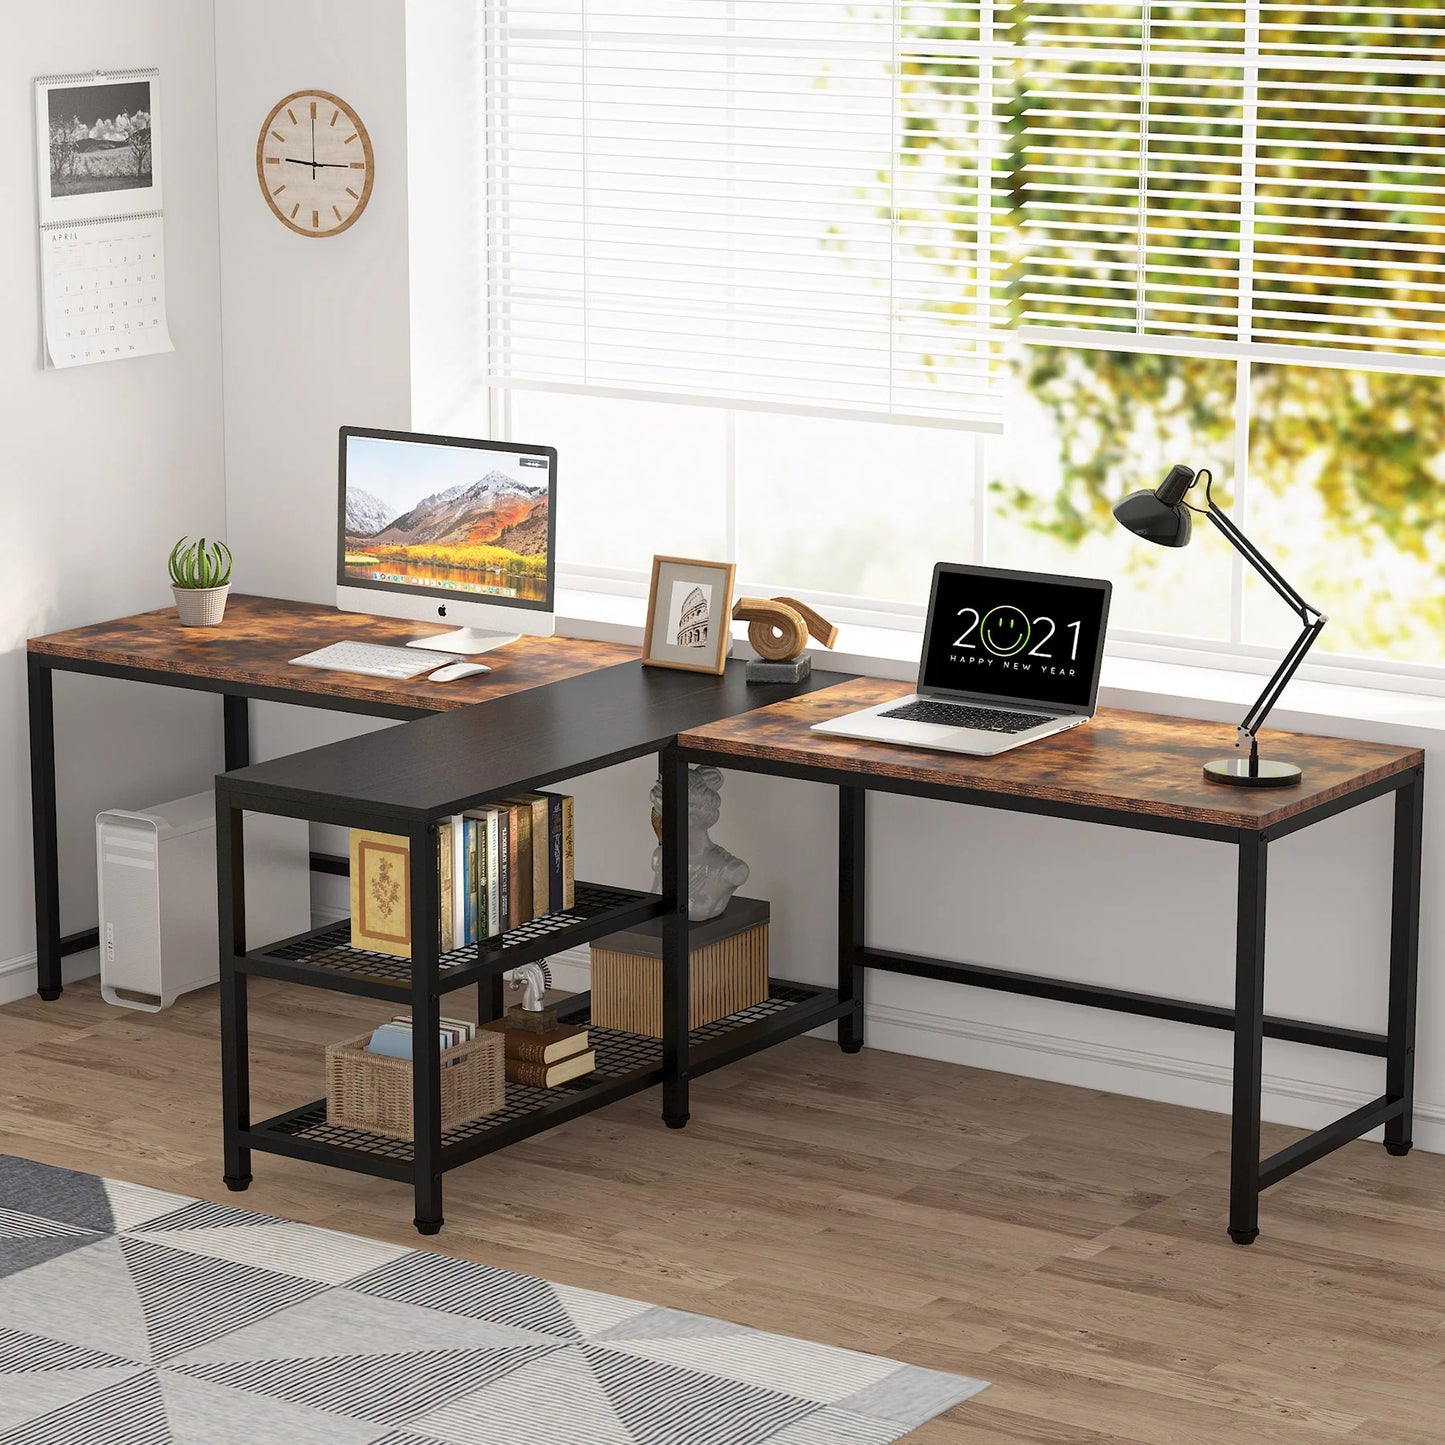 Tribesigns Two Person Desk, 94.5" Double Computer Desk with Shelves